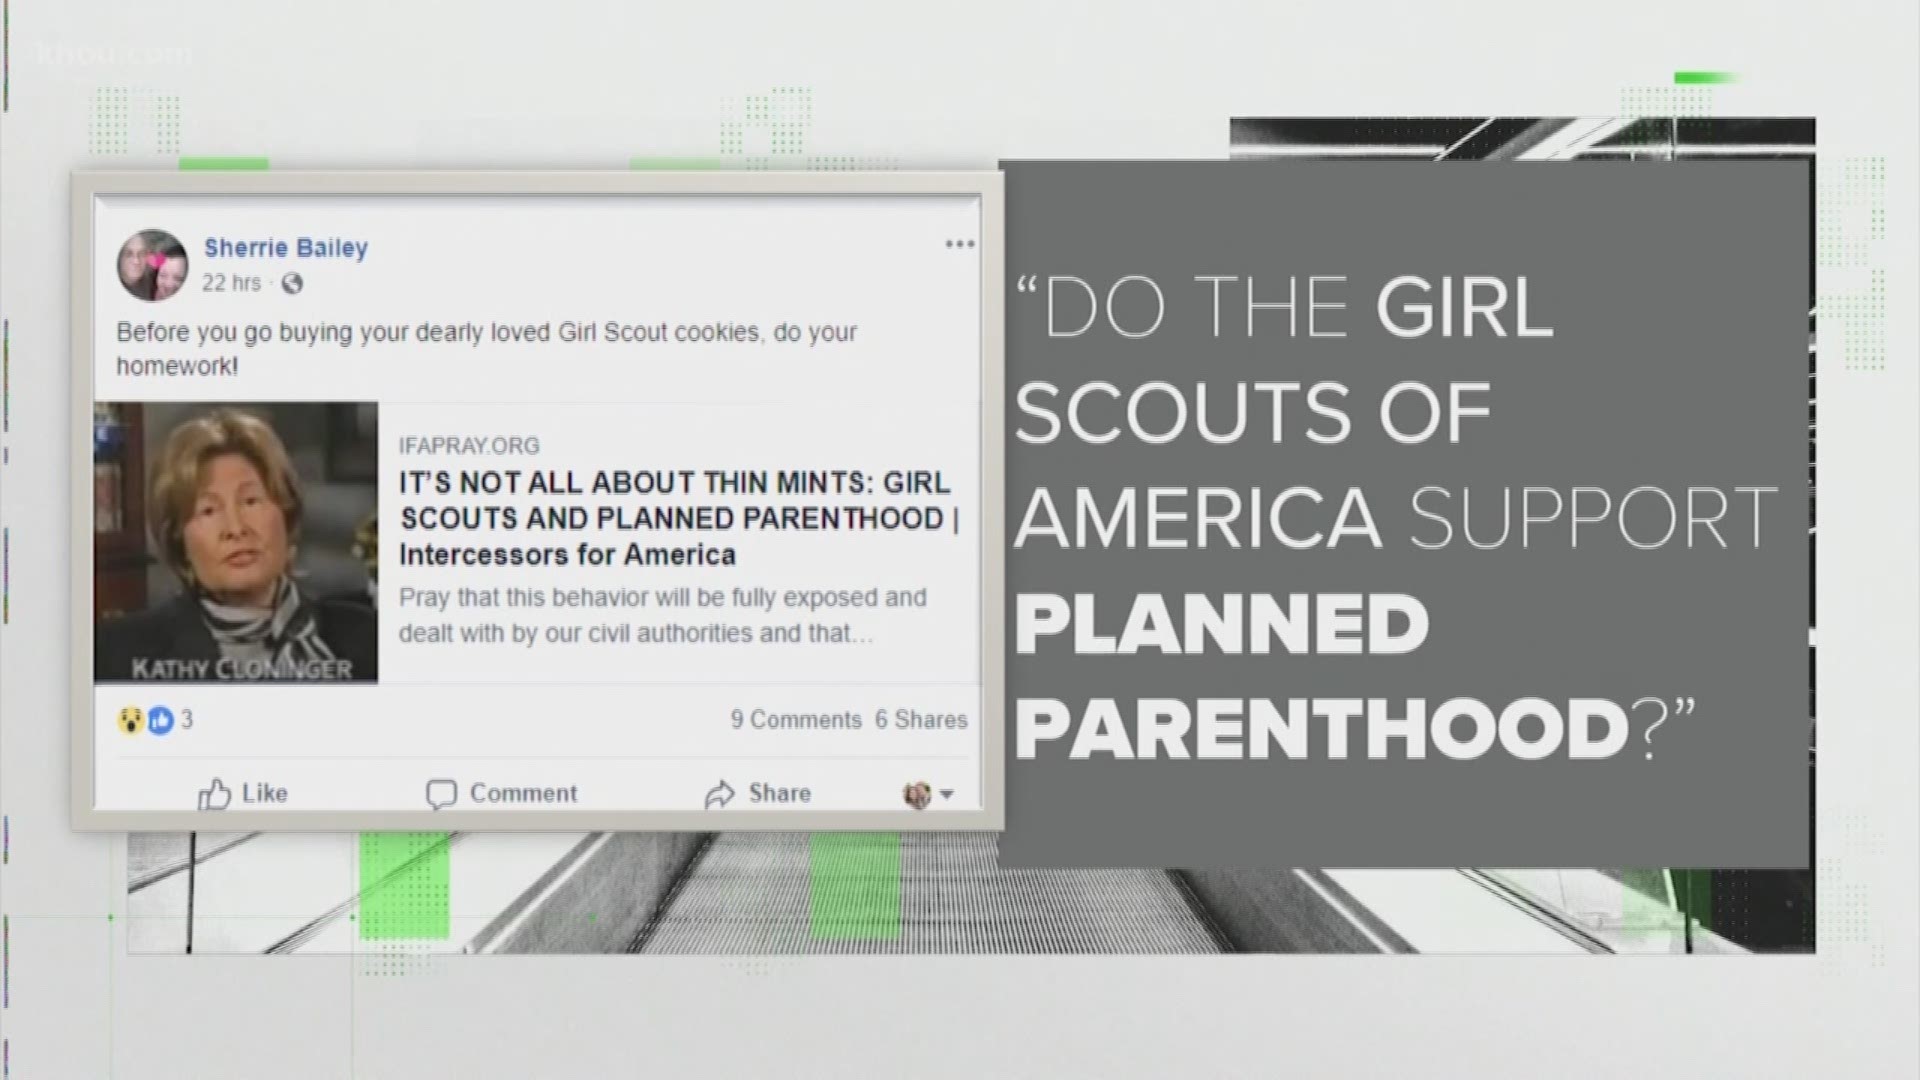 A viewer asked if we can verify a claim that Girl Scouts support Planned Parenthood, which is controversial for some due to their approach on abortions.